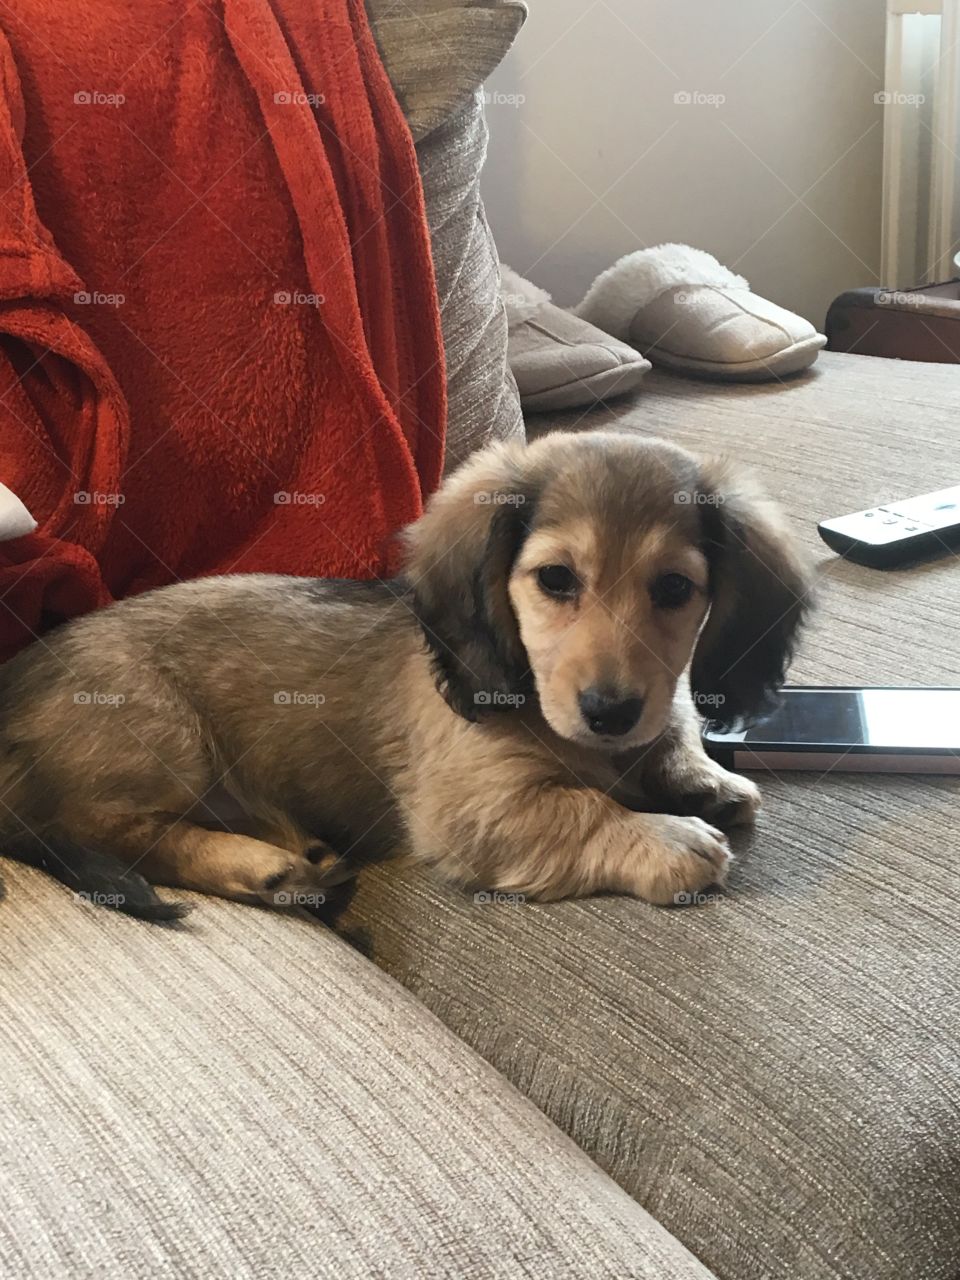 Miniature dachshund puppy! Just months old and so small and fluffy 